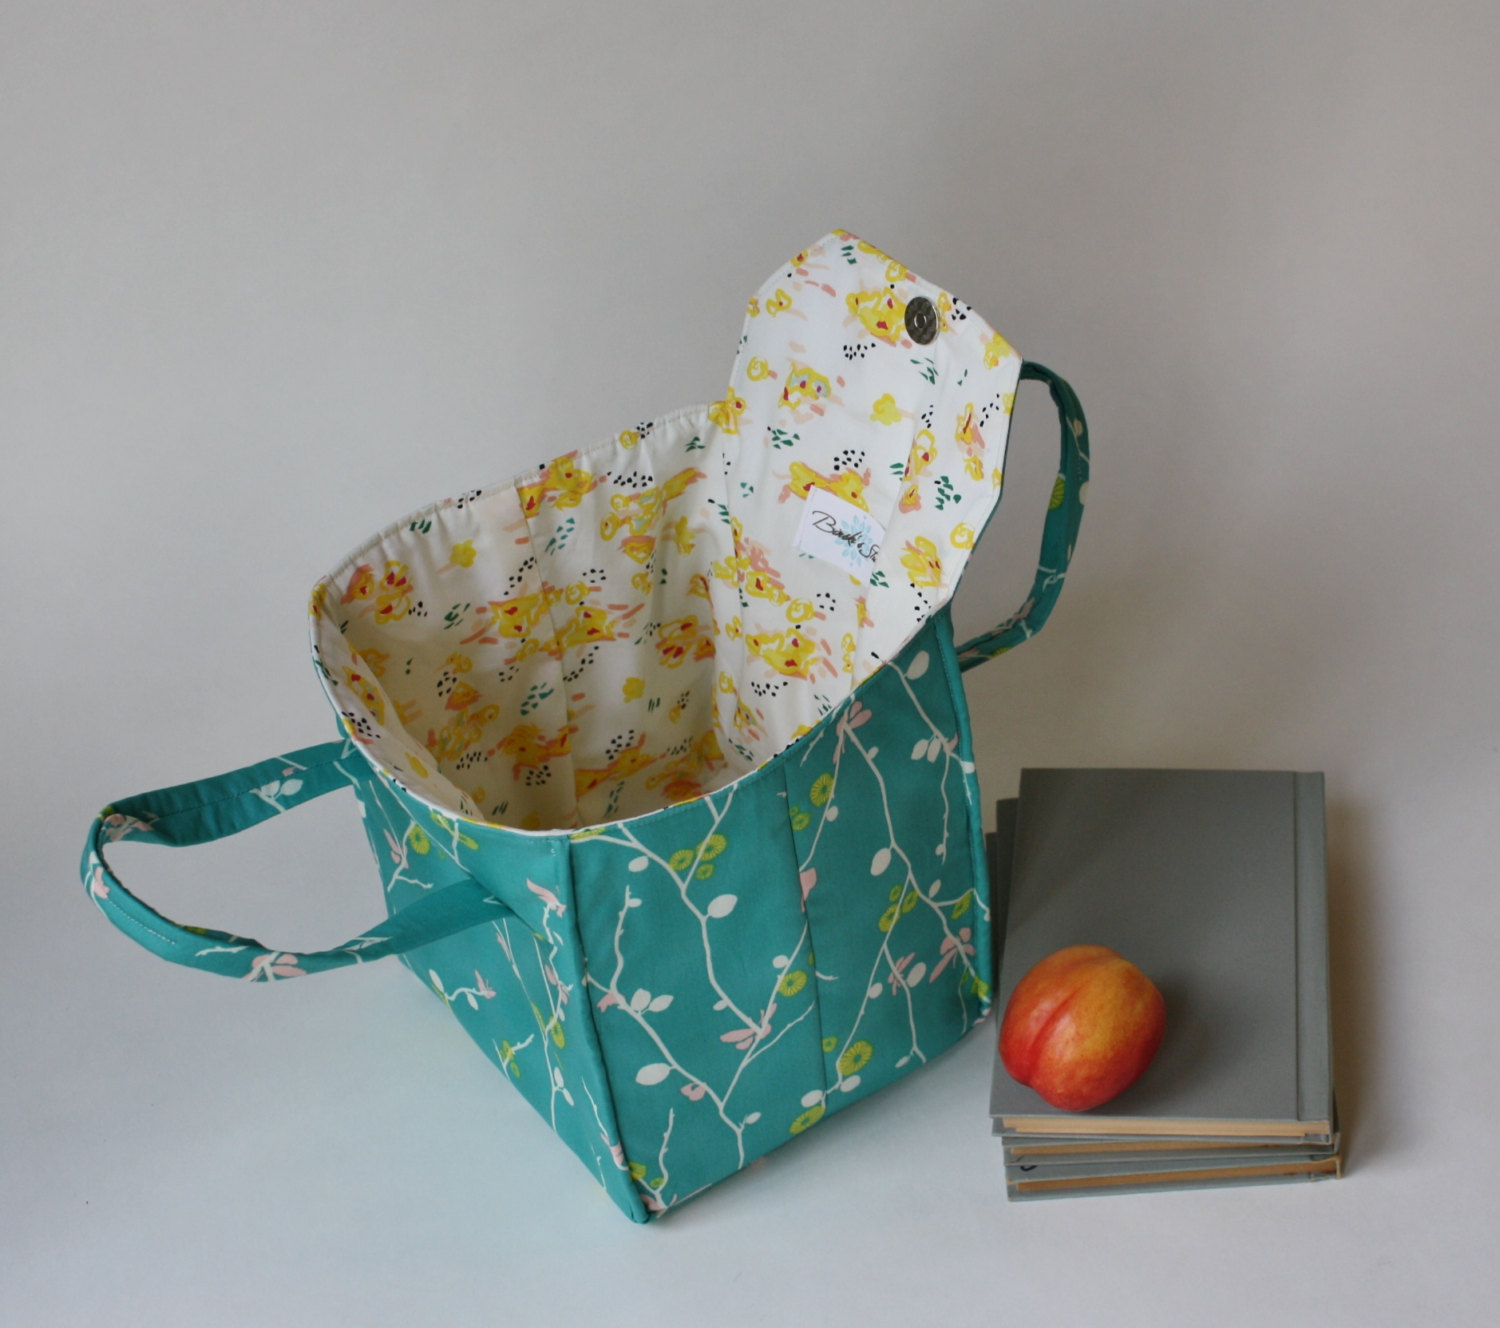 Insulated Lunch Bag in Rapture fabric by Pat Bravo - Insulated Lunch Tote - Bento Box Carrier - Ready to Ship